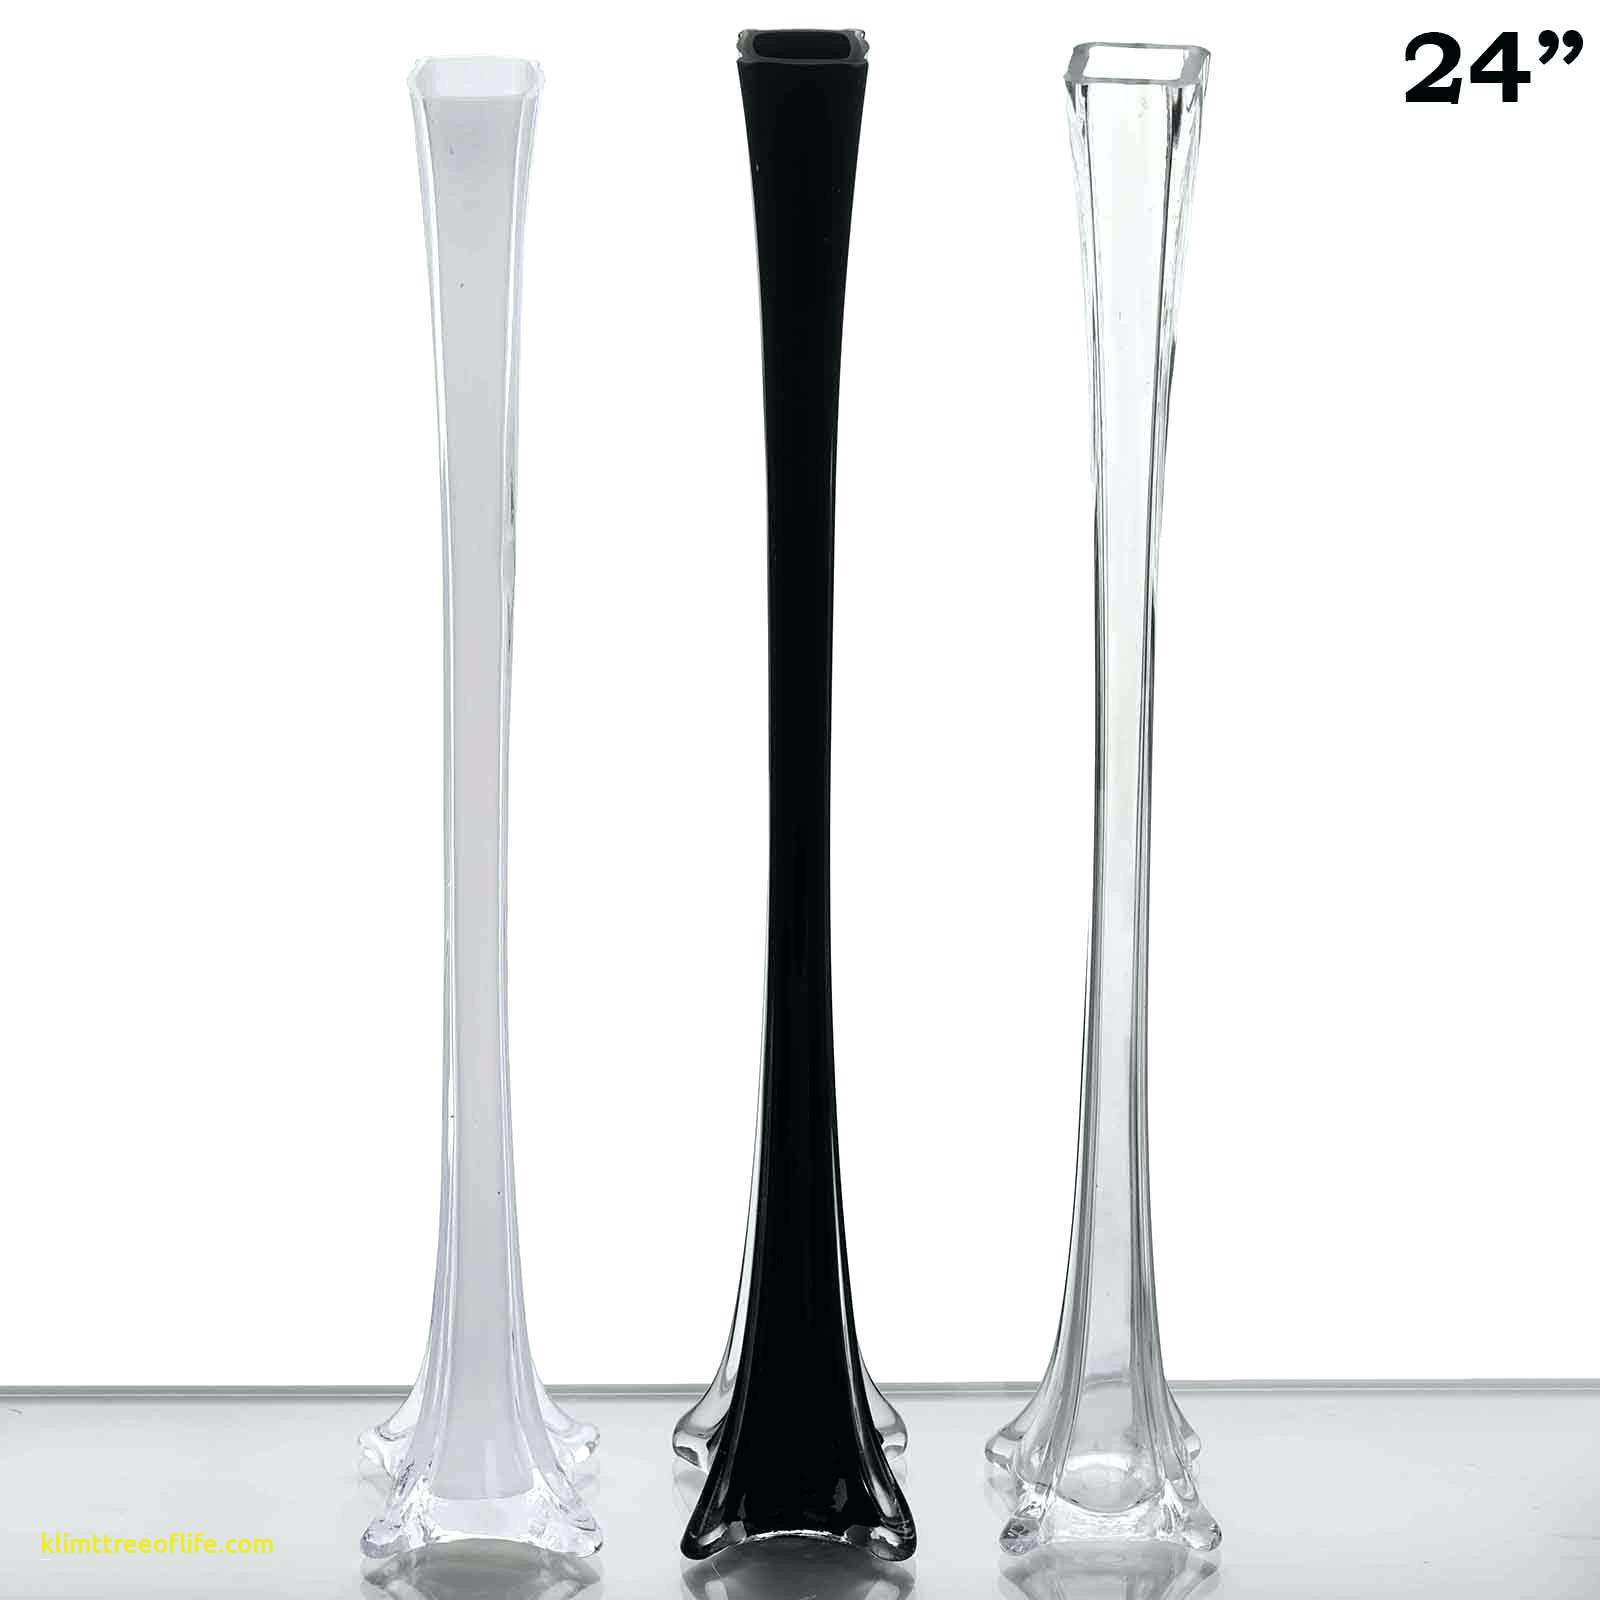 13 attractive 24 Inch Glass Vase 2024 free download 24 inch glass vase of 24 glass vase images stylish glass living room furniture mucsat for 24 glass vase images stylish glass living room furniture mucsat